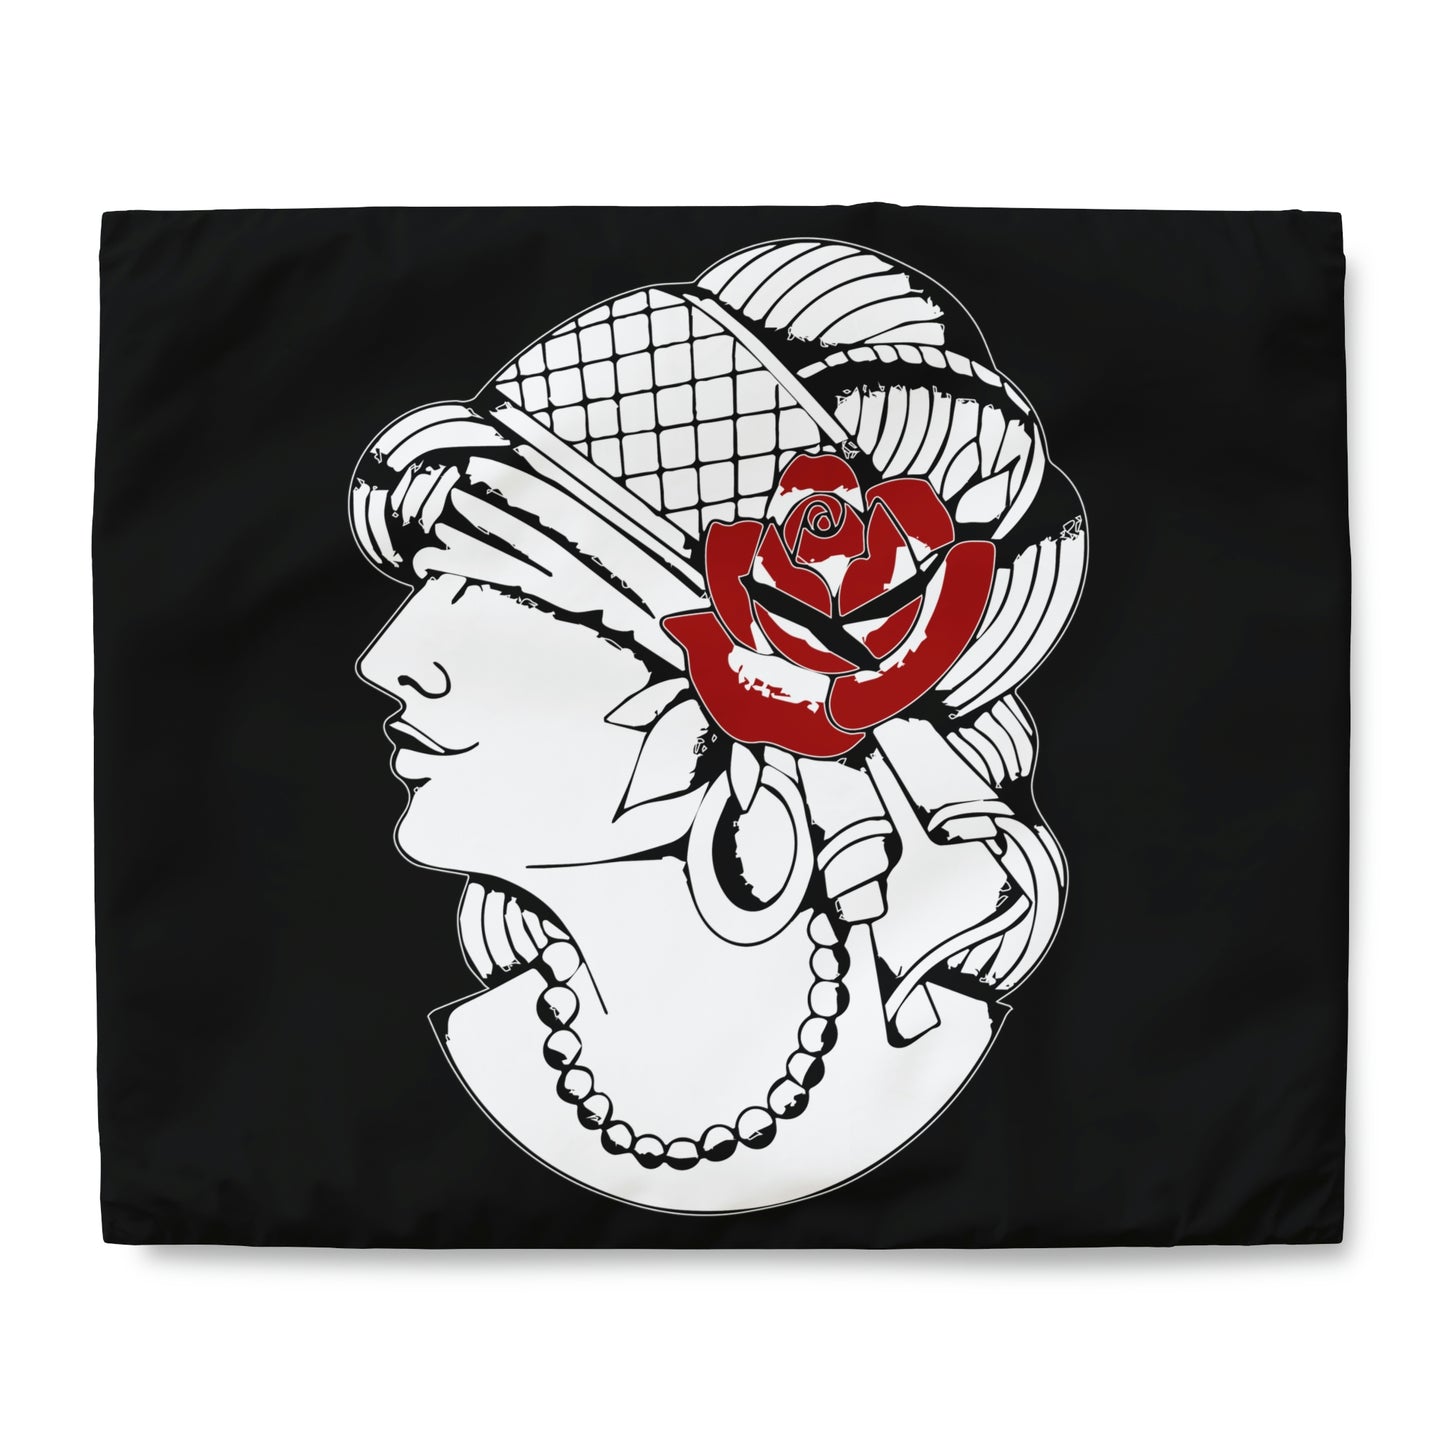 Duvet Cover | Gypsy's Red Rose Gypsy Lady (by @ryseart)